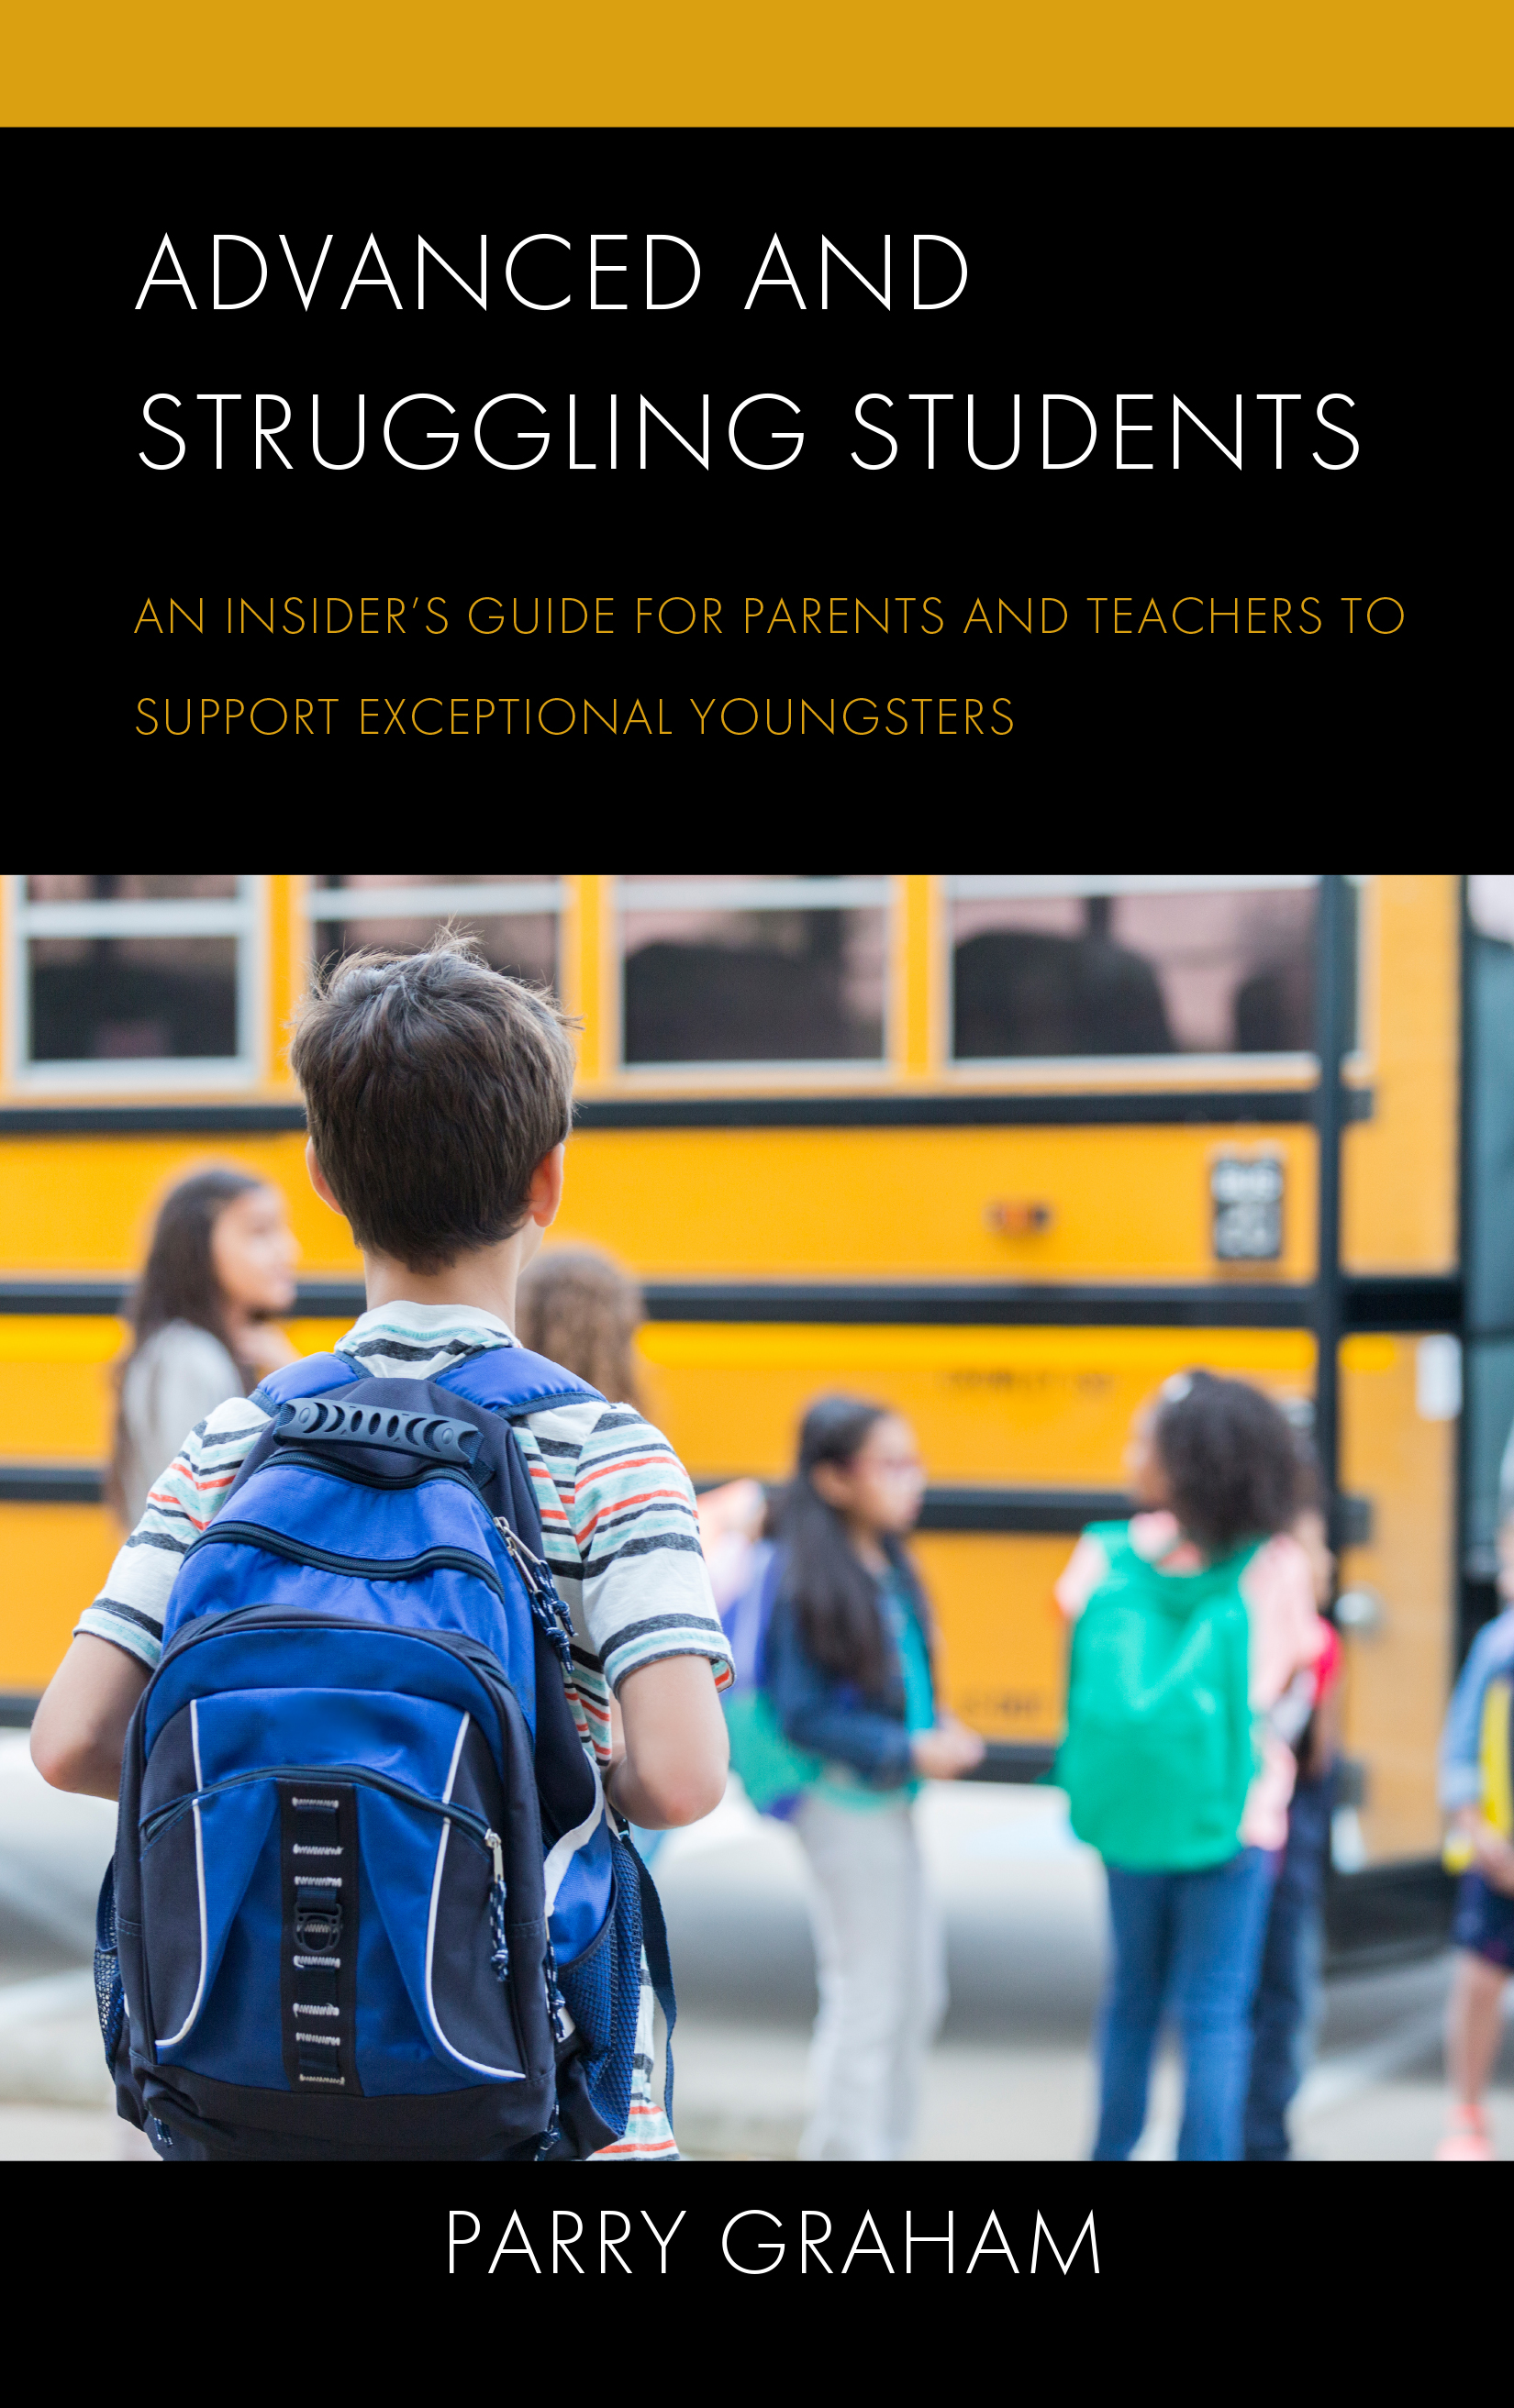 Advanced and Struggling Students: An Insider’s Guide for Parents and Teachers to Support Exceptional Youngsters